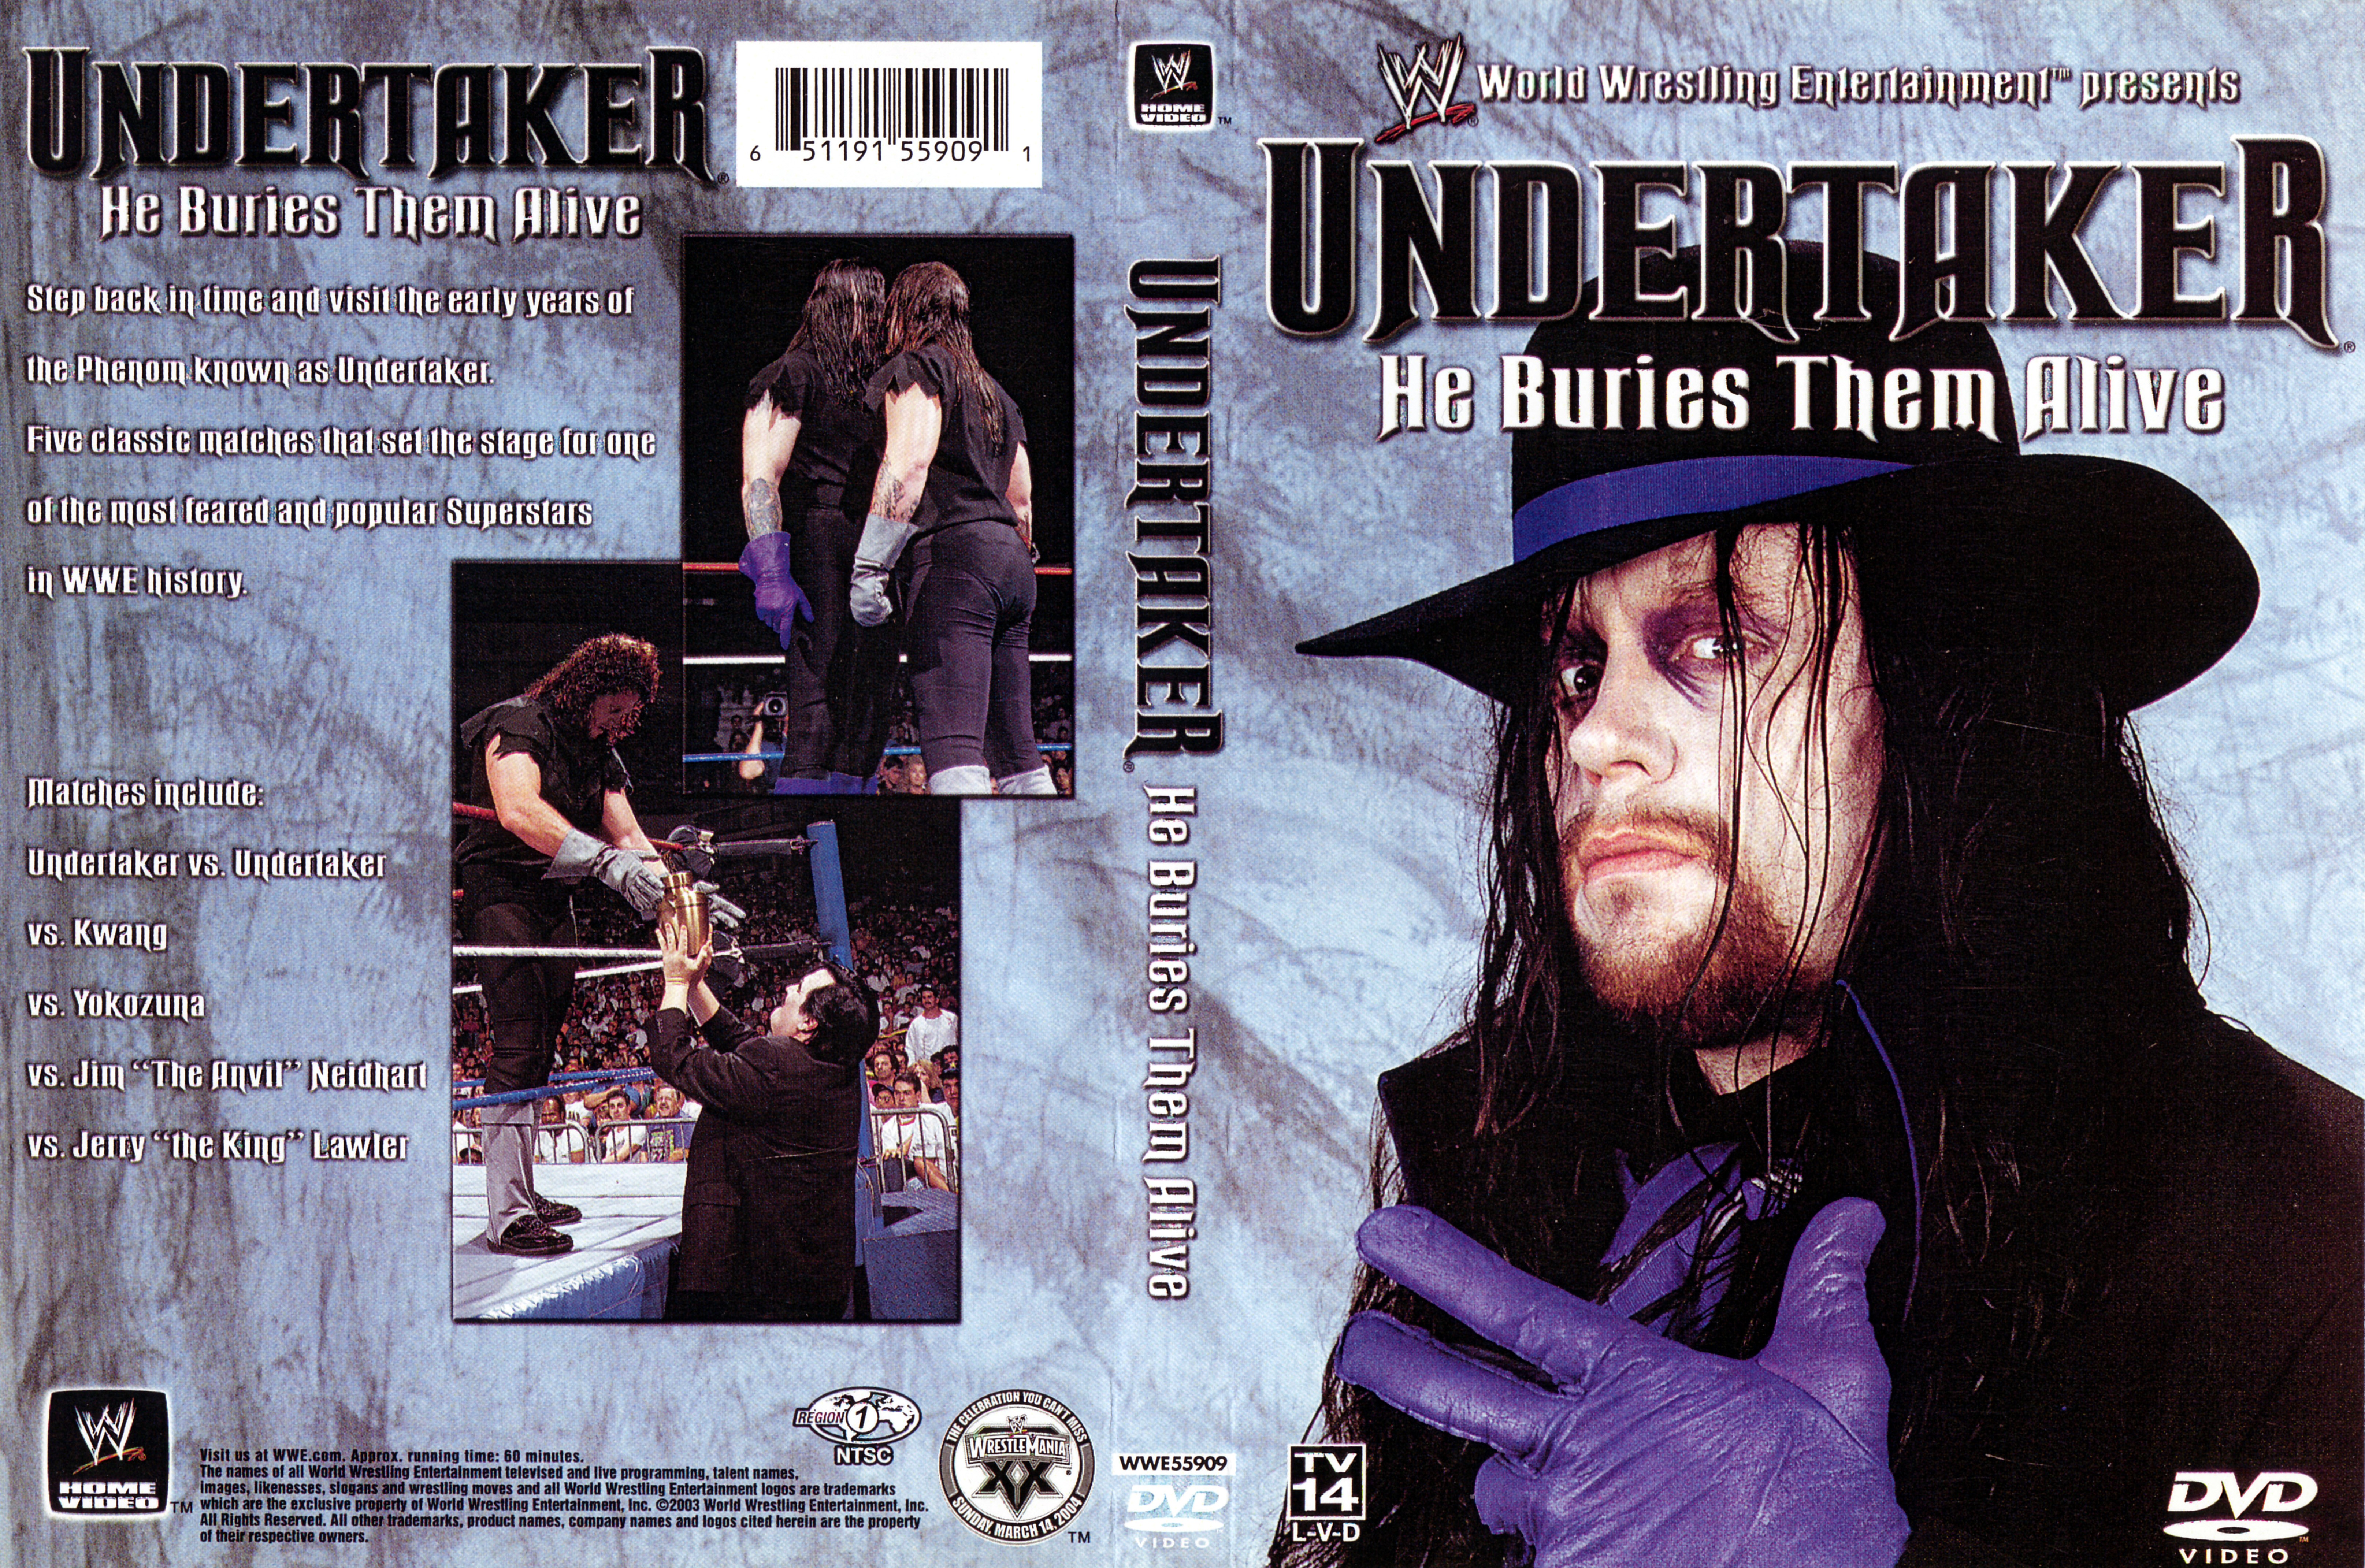 Jaquette DVD Undertaker He buries them alive